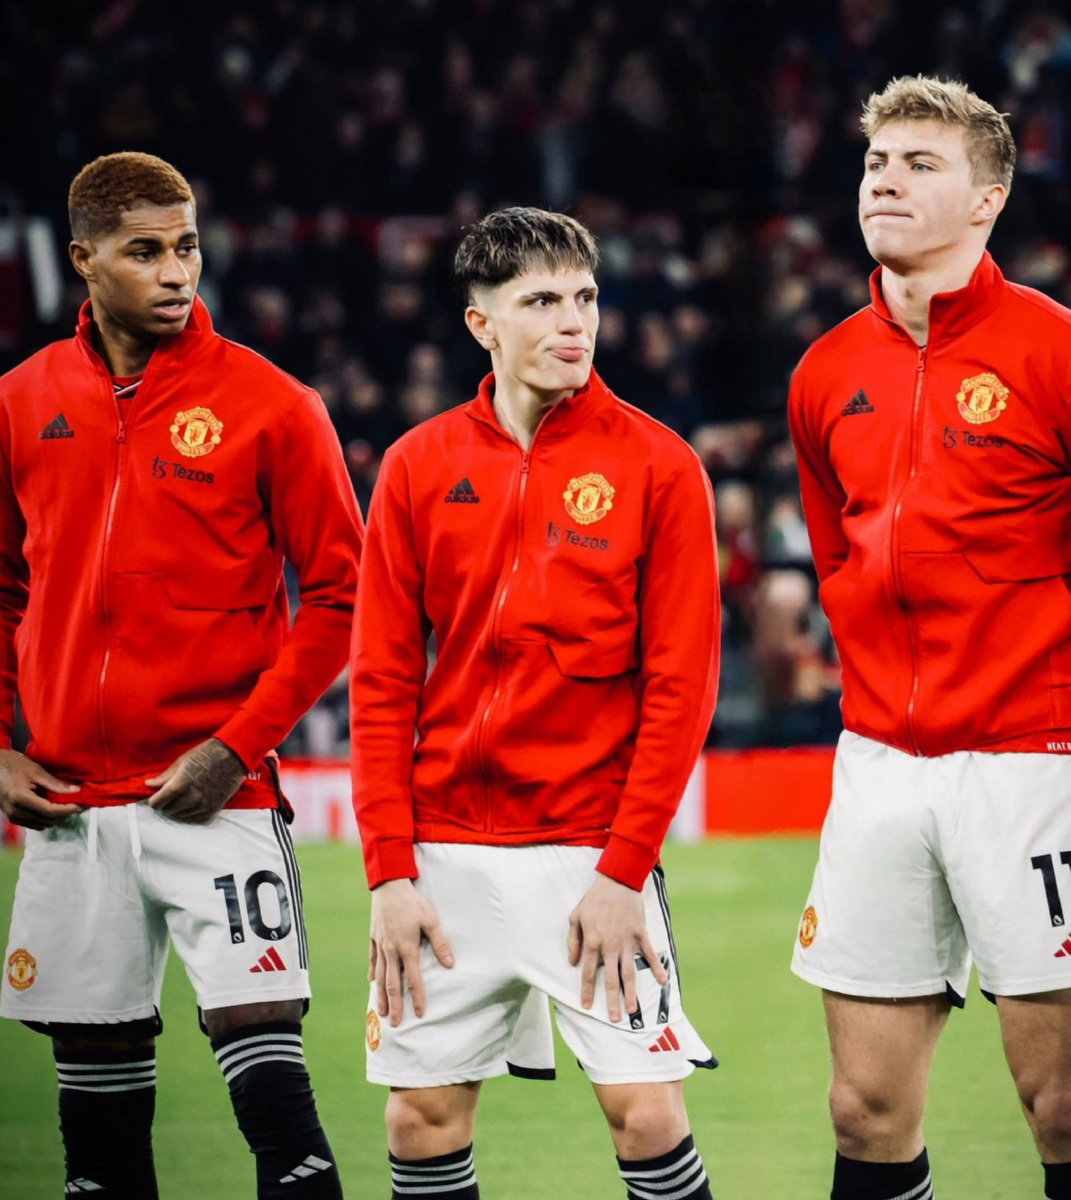 Our front 3 in the last 6 games since Garnacho moved to right wing. • Rashford: 3 goals, 2 assists, 3 big chances created • Højlund: 4 goals, 2 assists, 3 big chances created • Garnacho: 2 goals, 1 assist, 7 big chances created Much improved G/As, but notice how Garnacho…